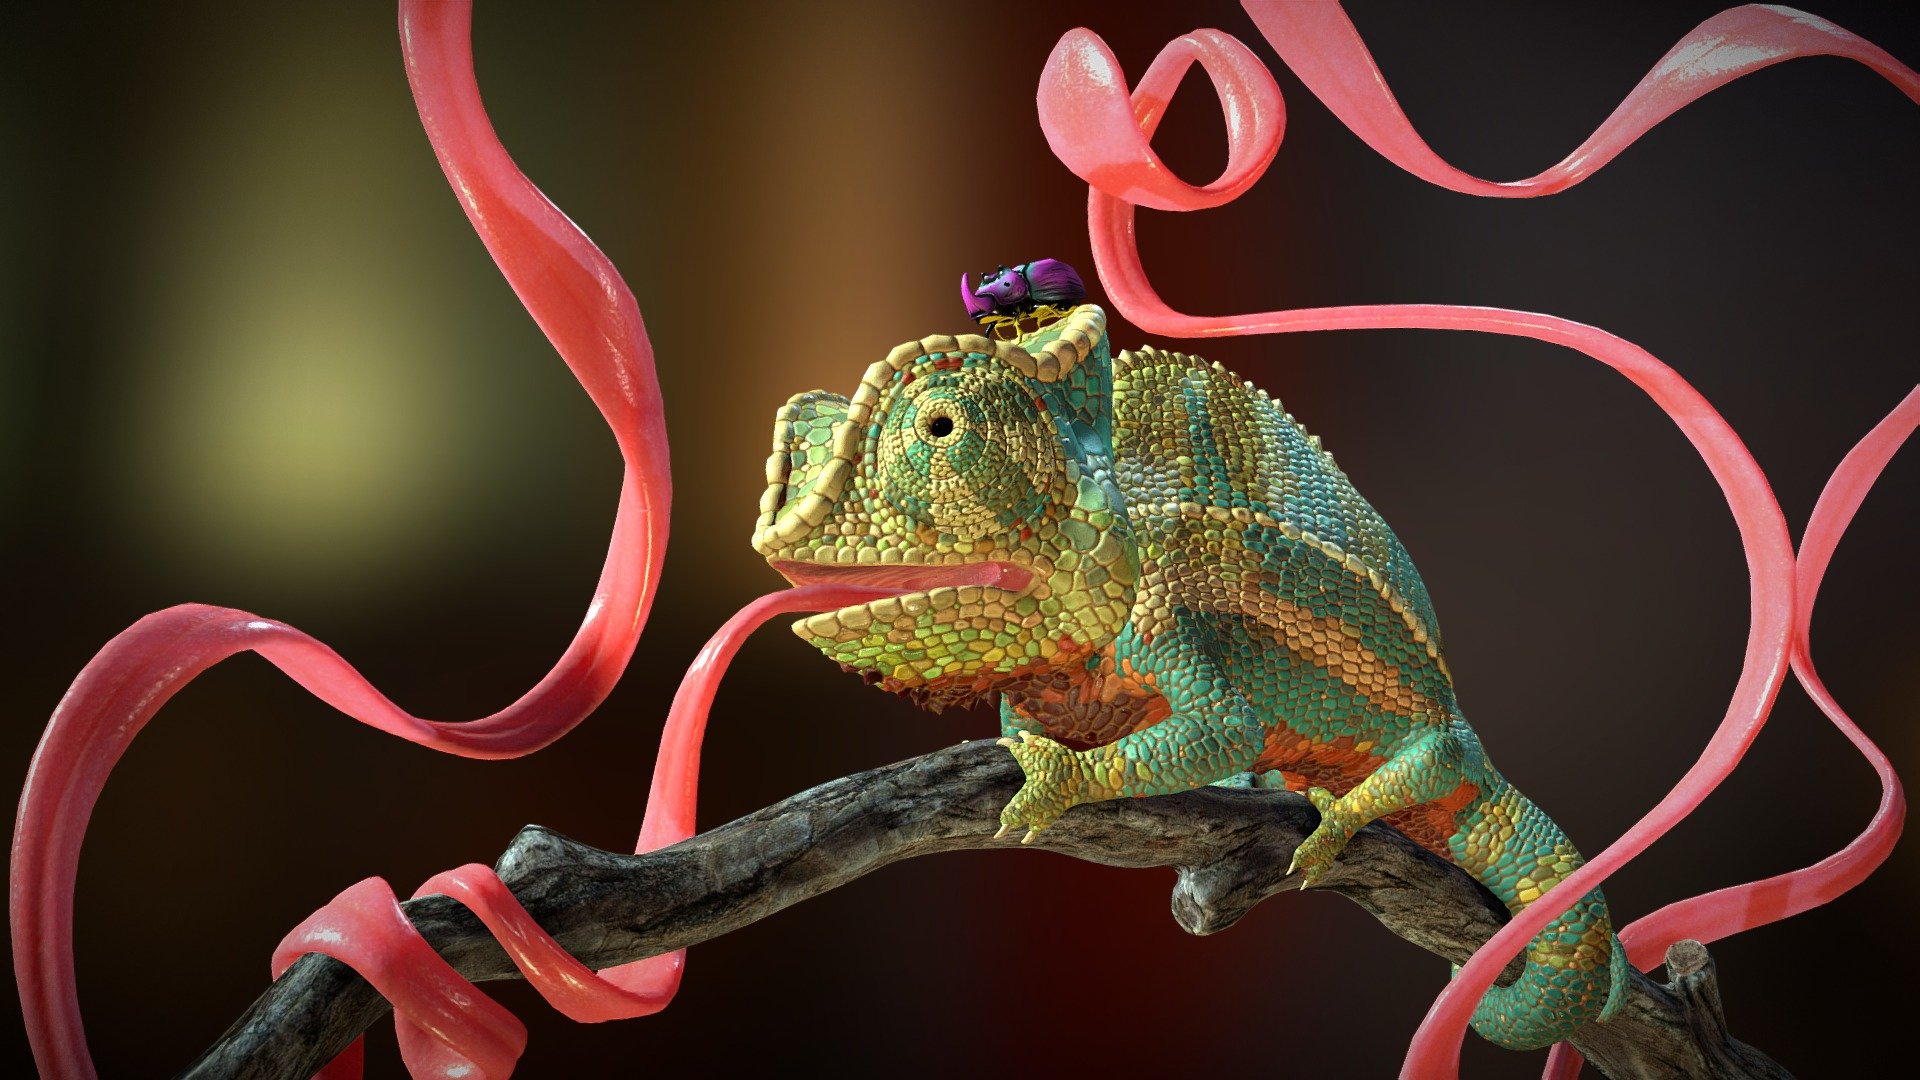 Made for the release of Substance Painter Spring 2018 Splashscreen! Started in ZBrush, textured in Substance Painter and brought into Maya for lighting and rendering with Arnold.

Check out my artstation for more high res renders: https://www.artstation.com/artwork/wk9w5

Thanks for stopping by! - Tongue Twisted Chameleon - 3D model by Nikie Monteleone (@nikiemonteleone) 3d model